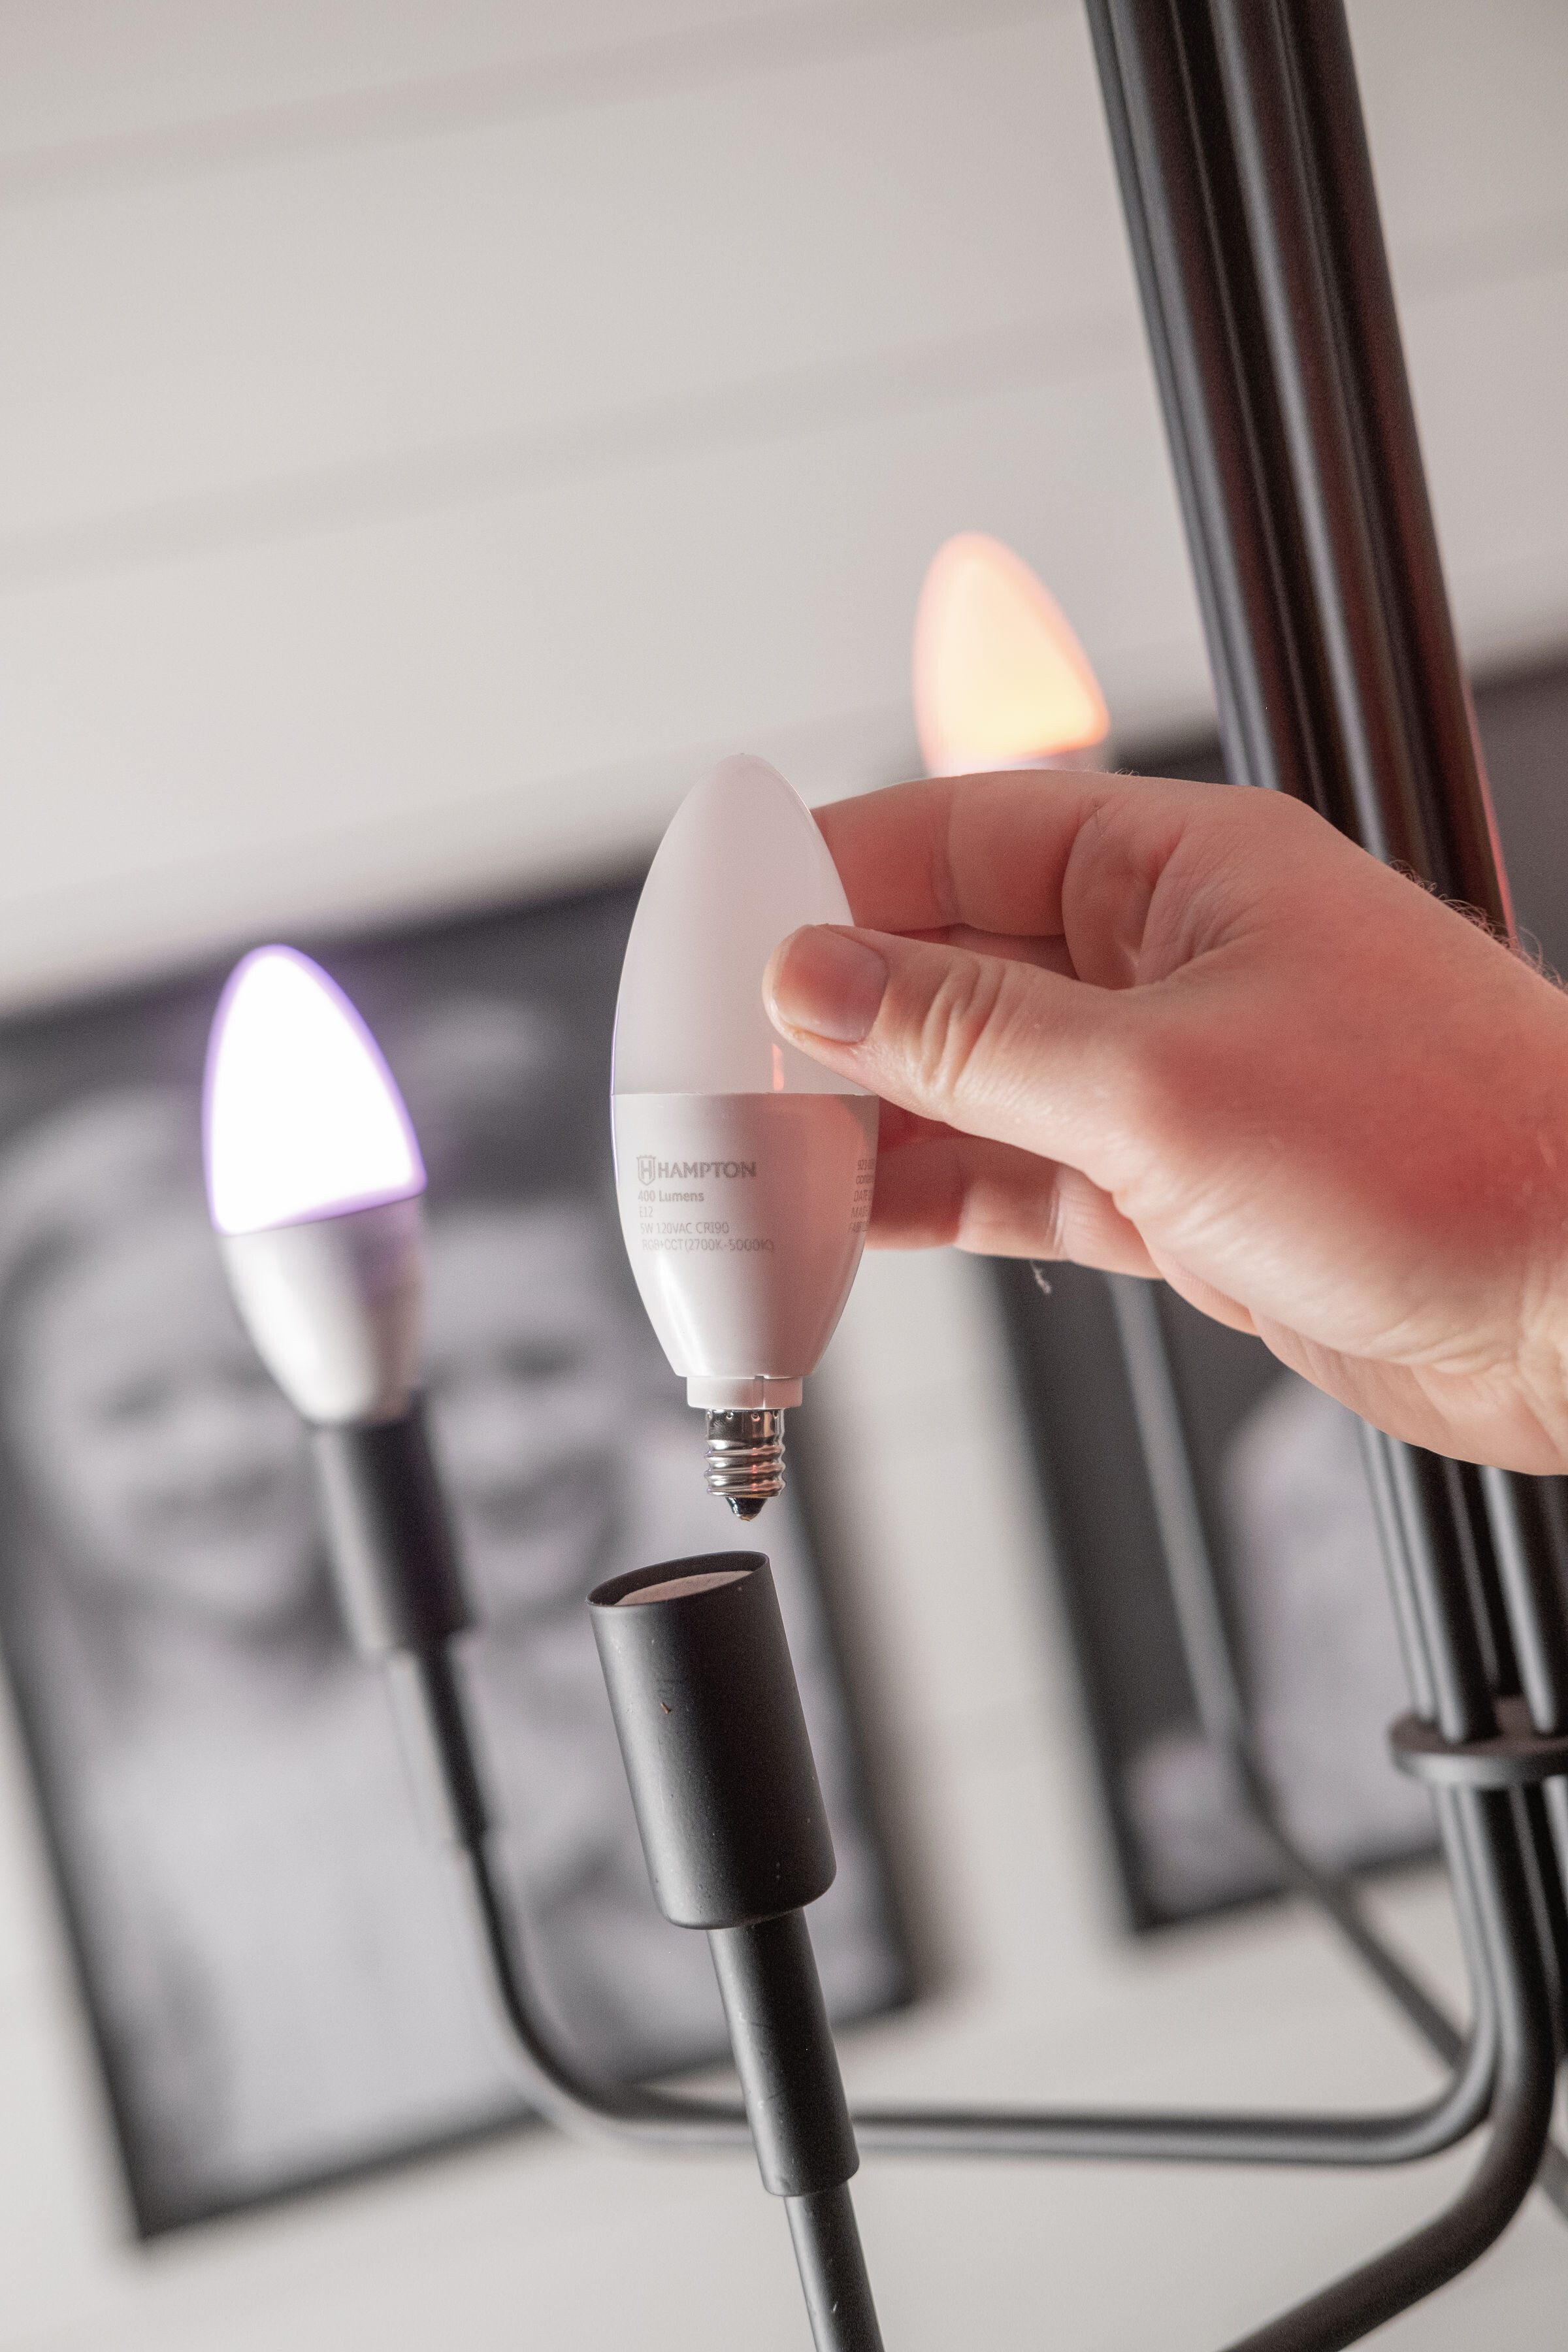 Philips Hue Candelabra E14 – waiting is over